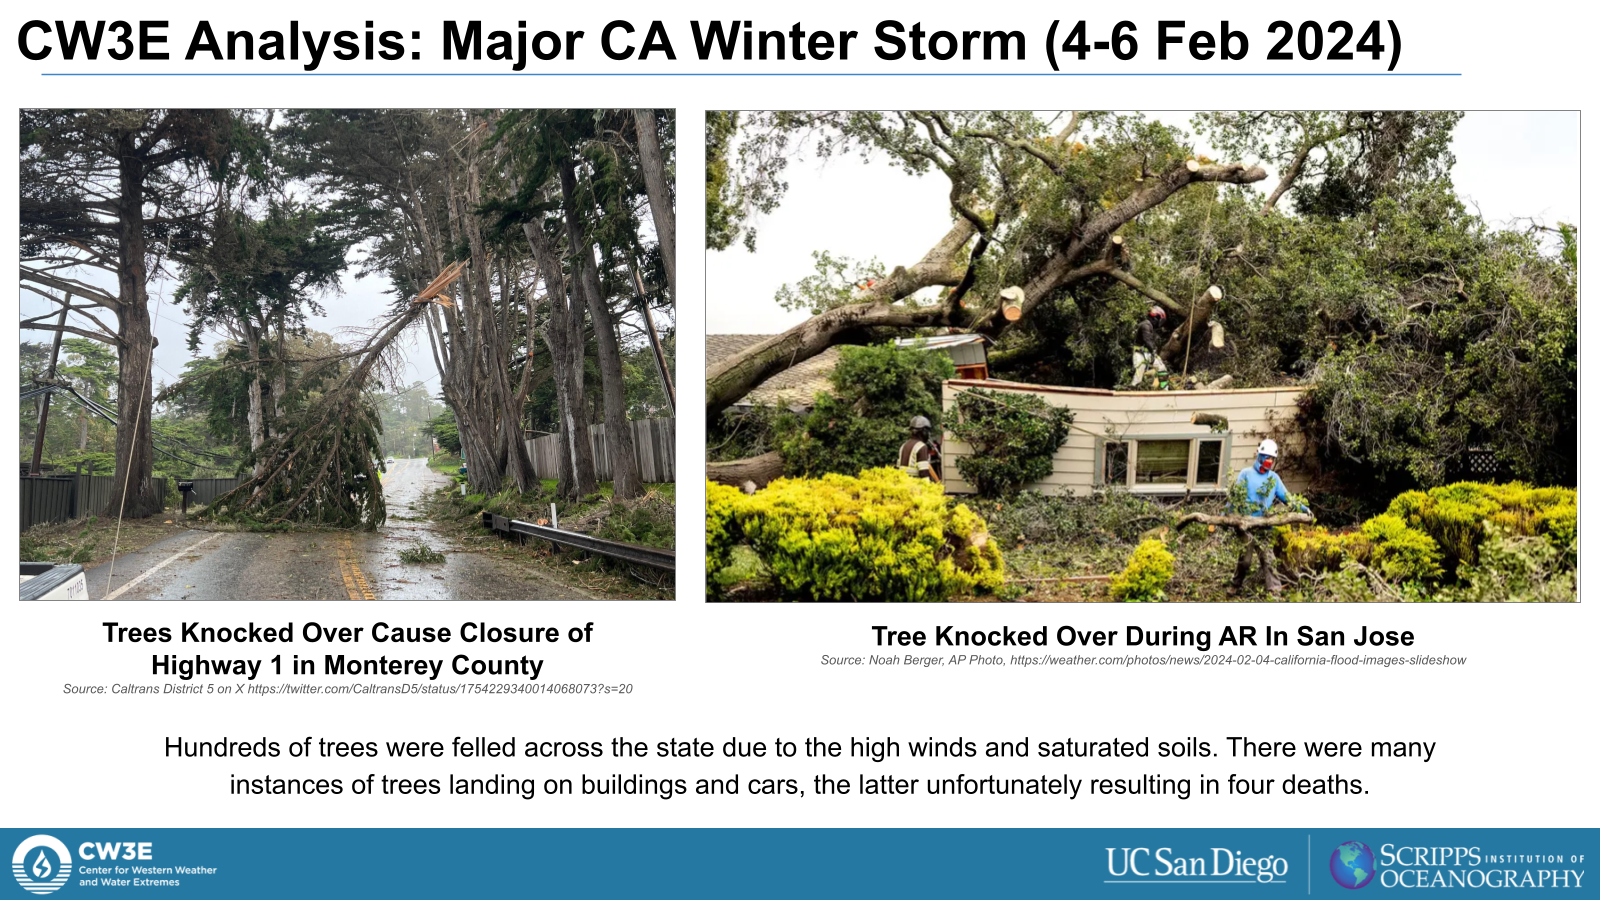 Images of trees toppled